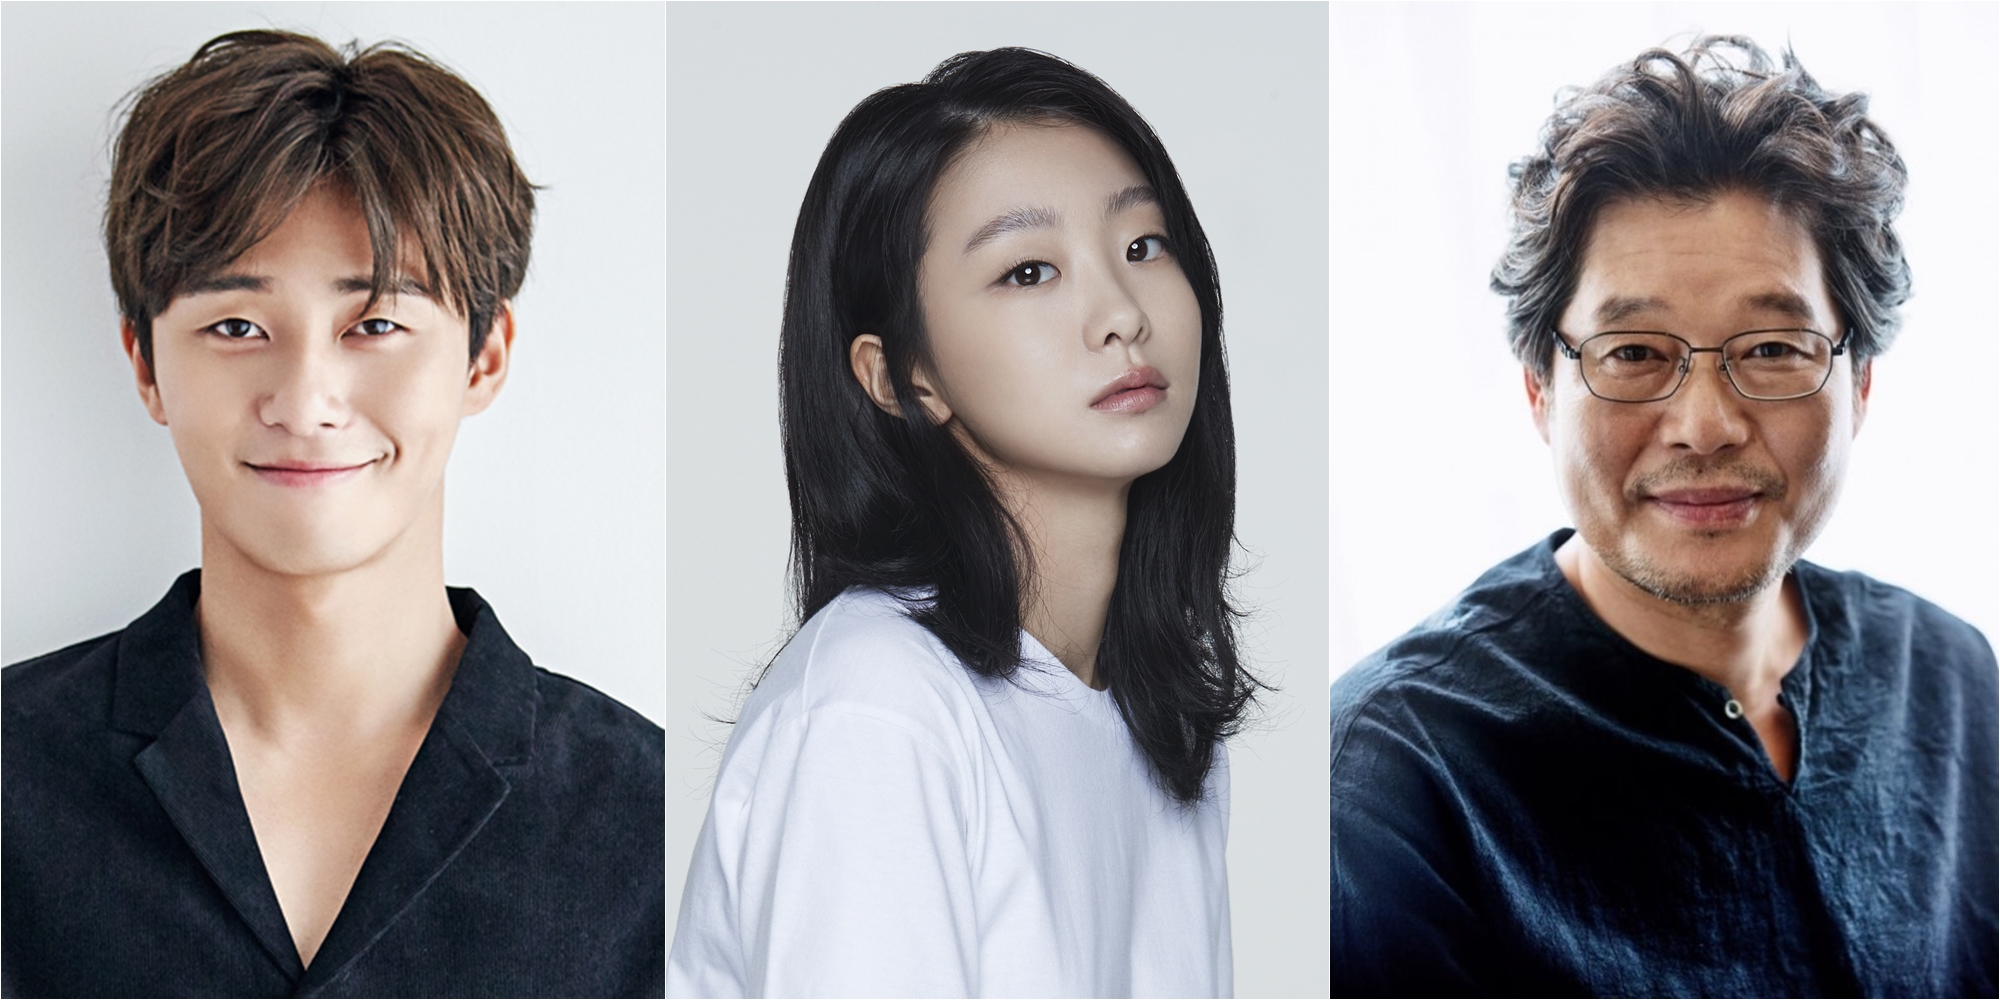 Itaewon Clath completed the class different perfect lineup of Park Seo-joon, Kim Dae-mi and Yoo Jae-myung.JTBCs new gilt drama Itaewon Klath (directed by Kim Sung-yoon, playwright Cho Kwang-jin, production showbox and Ji-eum, and original webtoon Itaewon Klath), which is broadcast following Chocolate, ignited expectations by achieving an extraordinary meeting between Park Seo-joon, Kim Dae-mi and Yoo Jae-myung.Itaewon Clath, based on the next webtoon of the same name, depicts the hip rebellion of youths who are united in an unreasonable world, stubbornness and persuasion.Their entrepreneurial myths are unfolding in the small streets of Itaewon, which seem to have compressed the world, chasing freedom with their own values.The popular webtoon Itaewon Klath (written/pictured Cho Kwang-jin) started its series in 2017 and is Legend of Legend, which has a cumulative number of views of 220 thousand.It was a hot topic that enjoyed both favorable and popular with the top-ranked payment sales of the next webtoon and 9.9 rating, and it caused explosive attention, such as virtual casting becoming a hot topic after news of drama production was reported.The reason why Itaewon Klath is especially anticipated is because Cho Kwang-jin, who created the original work, took charge of writing the drama himself.The original authors struggle to maximize the charm of the original character and make the story structure solid further amplifies the expectation of webtoon enthusiasts as well as drama fans.Here, Actors with solid acting skills join the group, and expectations are hotter than ever.Park Seo-joon, an actor who does not need an explanation, plays Park Sae-roi, who has been hot online. Park Sae-roi is a straight-line young man who does not compromise on injustice.He is a person who starts a new dream challenge on the streets of Itaewon, which has entered with undead anger, and offers a lively cider with an unfavorable counterattack against the big company Jangga in the food service industry.Park Seo-joon has shown remarkable popularity based on his solid acting skills in each film that appears in and out of dramas and screens, including drama Why Secretary Kim Will Do It, Ssam My Way, and the movie Youth Police.He has been transformed without limit from the face of youthful youth to the rocoking that melts his emotions. He will once again renew his life.Park Seo-joons choice, which has already written the myth of unbeatable box office with an excellent perspective on his work, adds faith.Park said, Park is a good person who strives every moment while keeping his conviction.I wanted to challenge it because it is considered as a life character of many people who have seen the original work, but I wanted to challenge it because it is such an attractive person.  I expect that the challenges and growth of various characters appearing in Itaewon Clath will get a lot of sympathy and support from viewers.I will prepare hard so that I can be remembered as a good drama. The role of the high intelligence Socio Pass Joyser with Gods brain is played by Kim Dae-mi, a unique charm.Joy, who is famous for SNS star and power blogger, is a person with an angelic face and a reverse character.Kim Dae-mi is the best expectation that swept various movie awards last year, showing off fresh masks and unique acting skills in the movie Witch. The situation is that many people have been attracted to the next film Kim Dae-mi chooses.Actor Kim Dae-mi, who has a certain color of his own, will star in the first drama of his life through Itaewon Klath and capture viewers.As its been a long time, I feel both thrilled and burdened, and I think it will be a good job because the Actors, directors, and writers to be together are great people.I hope you can expect a lot of Kim Da-mi as Joyser, he said.Yoo Jae-myung, who is in the best days of drama and film, plays Jang Dae-hee, chairman of Jangga, a large food service industry company.Jang Dae-hee is an embroidered chaebol and a Javiris authoritarian who has been making cooking a business in his childhood memories.His life, which was like a castle, begins to shake a little bit as he faces the blindness of his sons accident.Yoo Jae-myung, who gave deep regret to viewers with his thick acting in Secret Forest, Life, and Confession.He transformed from Itaewon Clath to Jang Dae-hee, chairman of the company without mercy, and fascinated viewers with a different face than ever.In particular, the confrontation without concessions that he will show with Park Seo-joon is considered to be the best point of observation to expect Itaewon Clath.Yoo Jae-myung said, I am delighted to be with Itaewon Clath and I am expecting to shoot because it will be a fun work.I want to visit the viewers by completing the work with the directors and the artists with the Actors of the seniors and juniors. The production team of Itaewon Klath said, The combination of Park Seo-joon, Kim Dae-mi and Yoo Jae-myung is perfect.You can expect the synergy of Actors who will add character with their own color, he said.On the other hand, Itaewon Clath is a work that coincides with director Kim Sung-yoon, who has been recognized for his sensual performance through Gurmigreen Moonlight and Discovery of Love, and writer Cho Kwang-jin, who gave exciting fun and deep sympathy with webtoon Itaewon Clath.Here, it adds to expectations as it is the first drama produced by Showbox, which has shown films with workability and popularity such as Taxi Driver, Assassination, and Tunnel.It will be broadcast first after JTBCs new gilt drama Chocolate.